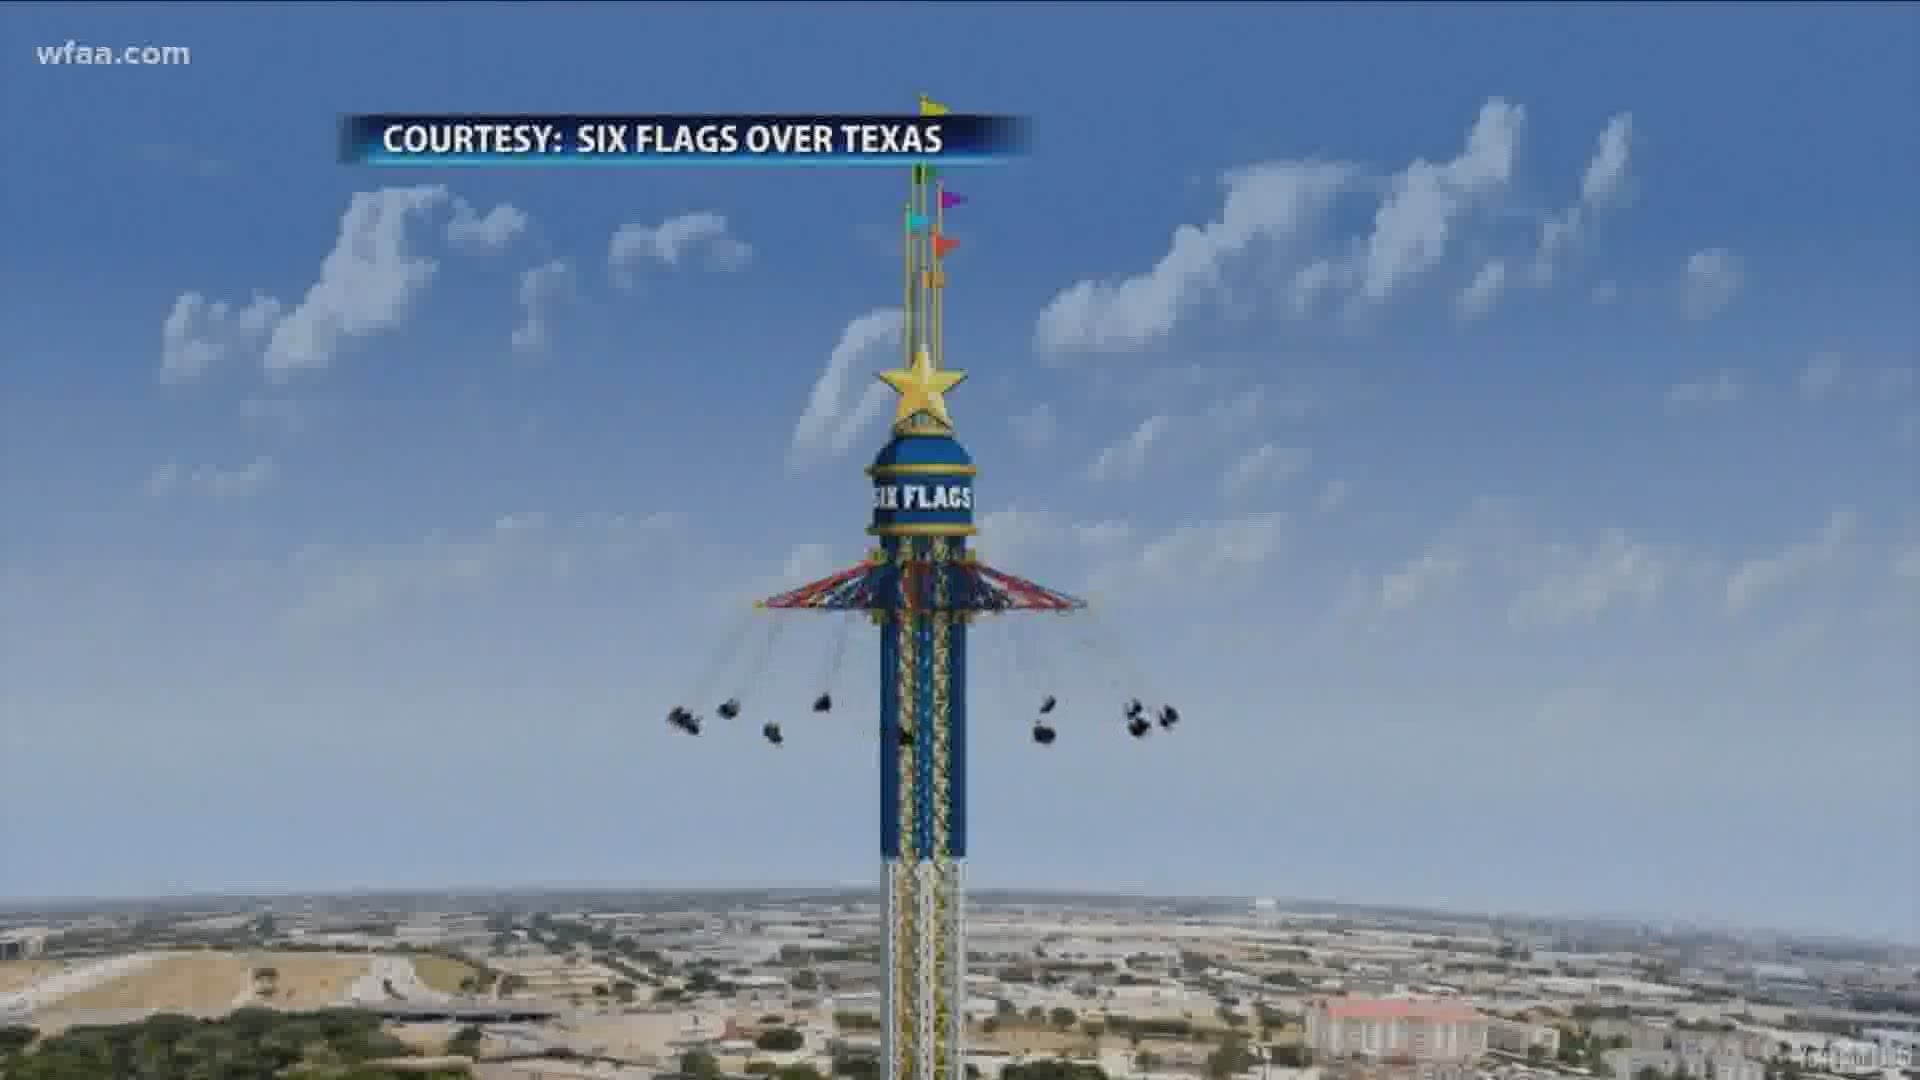 Six Flags over Texas has not received the go-ahead yet, but Oklahoma City location reopens June 5